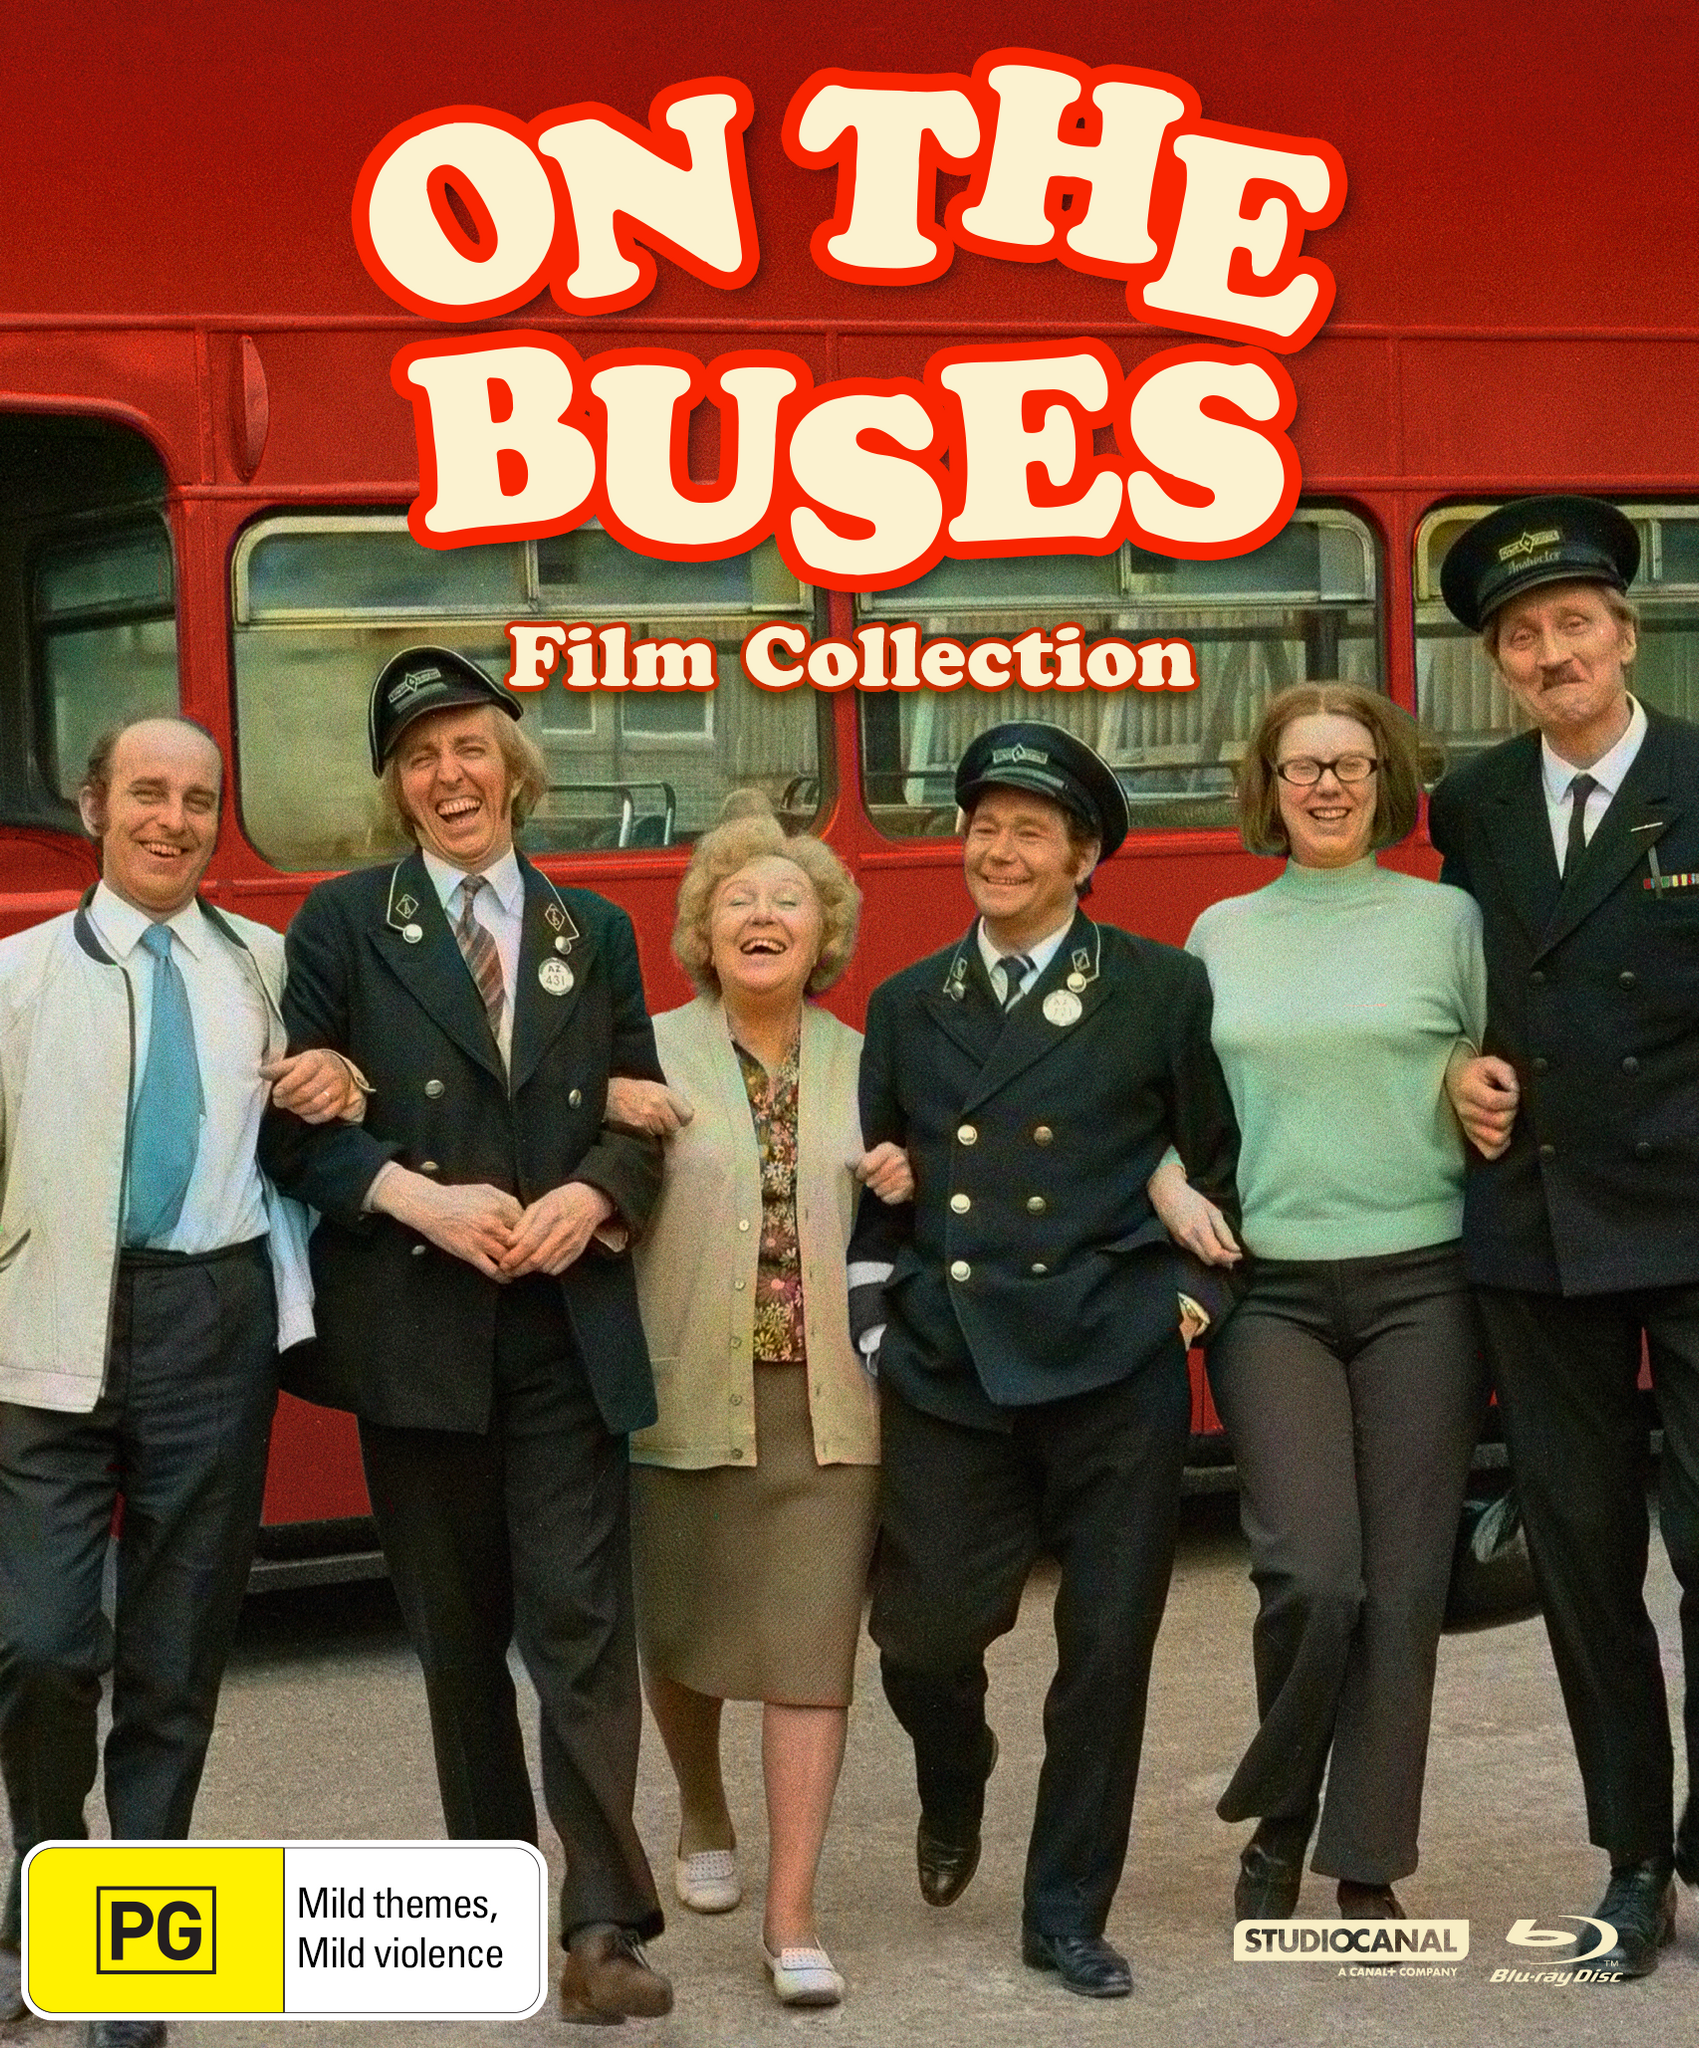 ON THE BUSES: FILM COLLECTION (ON THE BUSES / MUTINY ON THE BUSES / HOLIDAY ON THE BUSES) - SPECIAL EDITION BLU-RAY